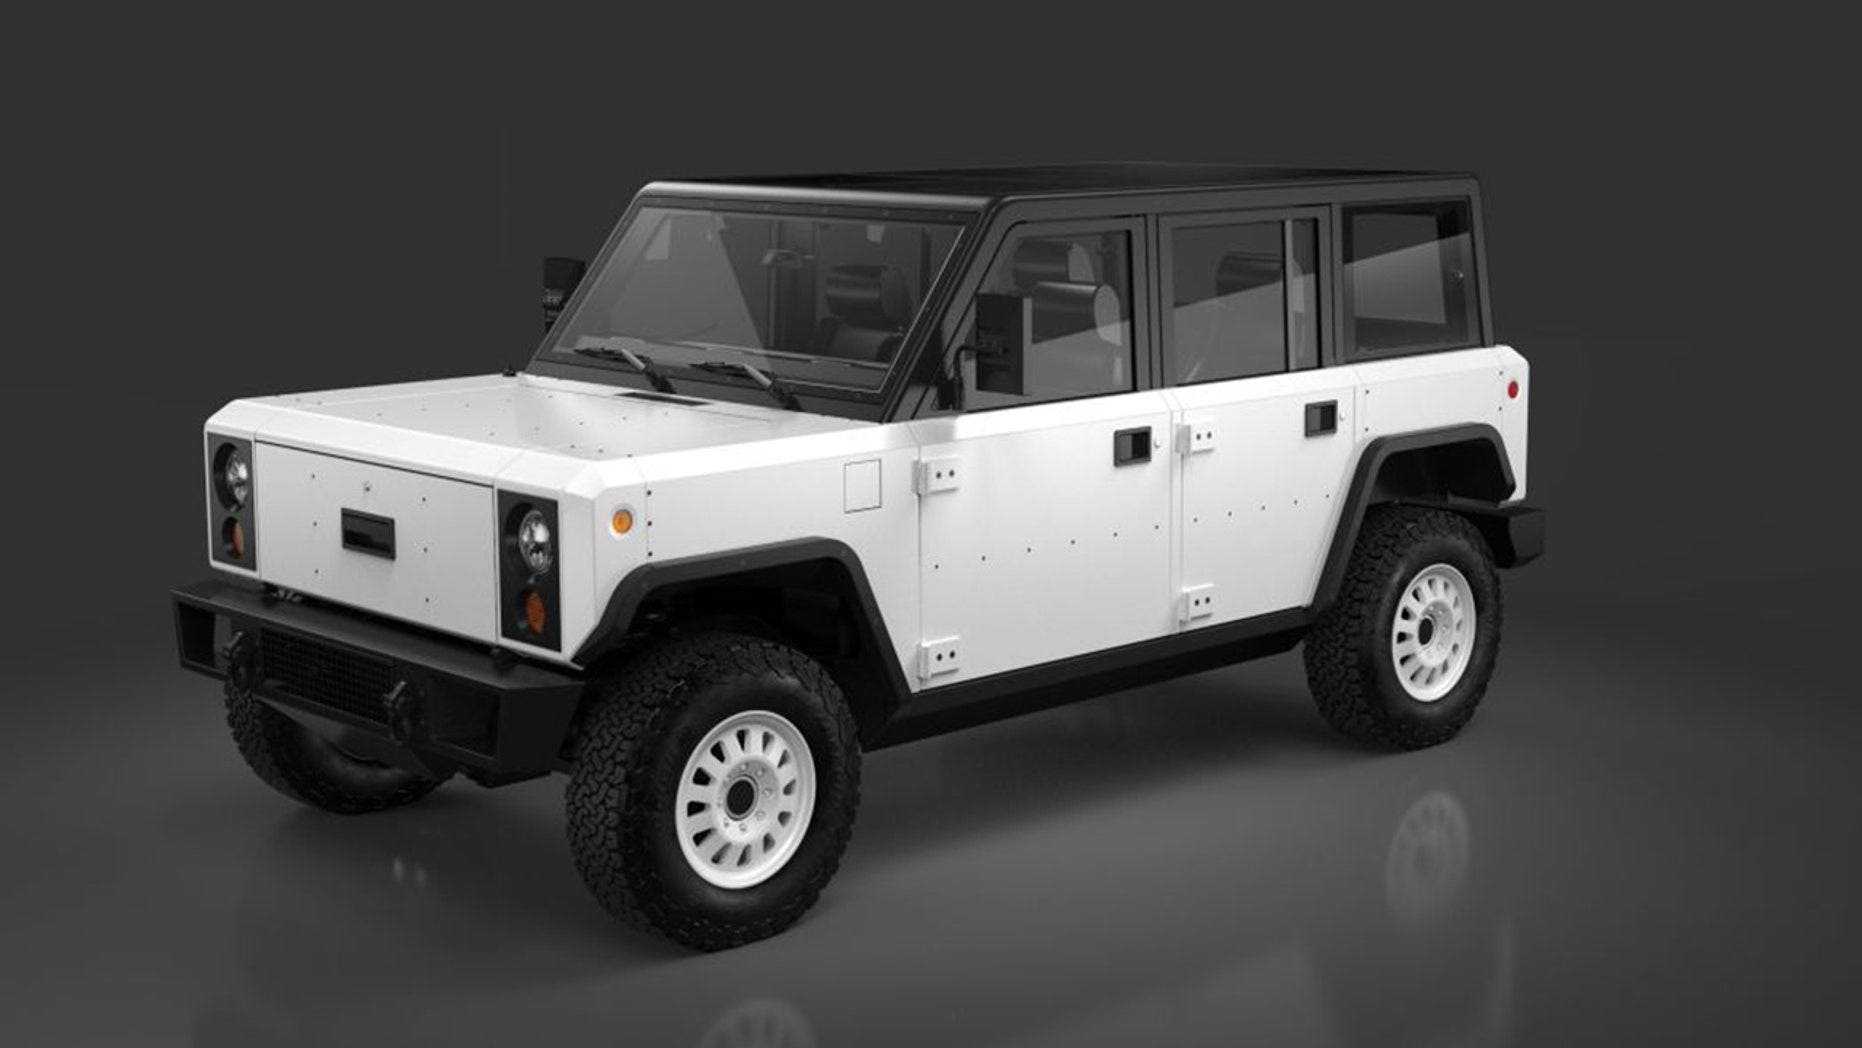 The boxy Bollinger Motors electric SUV isn’t happening anytime soon